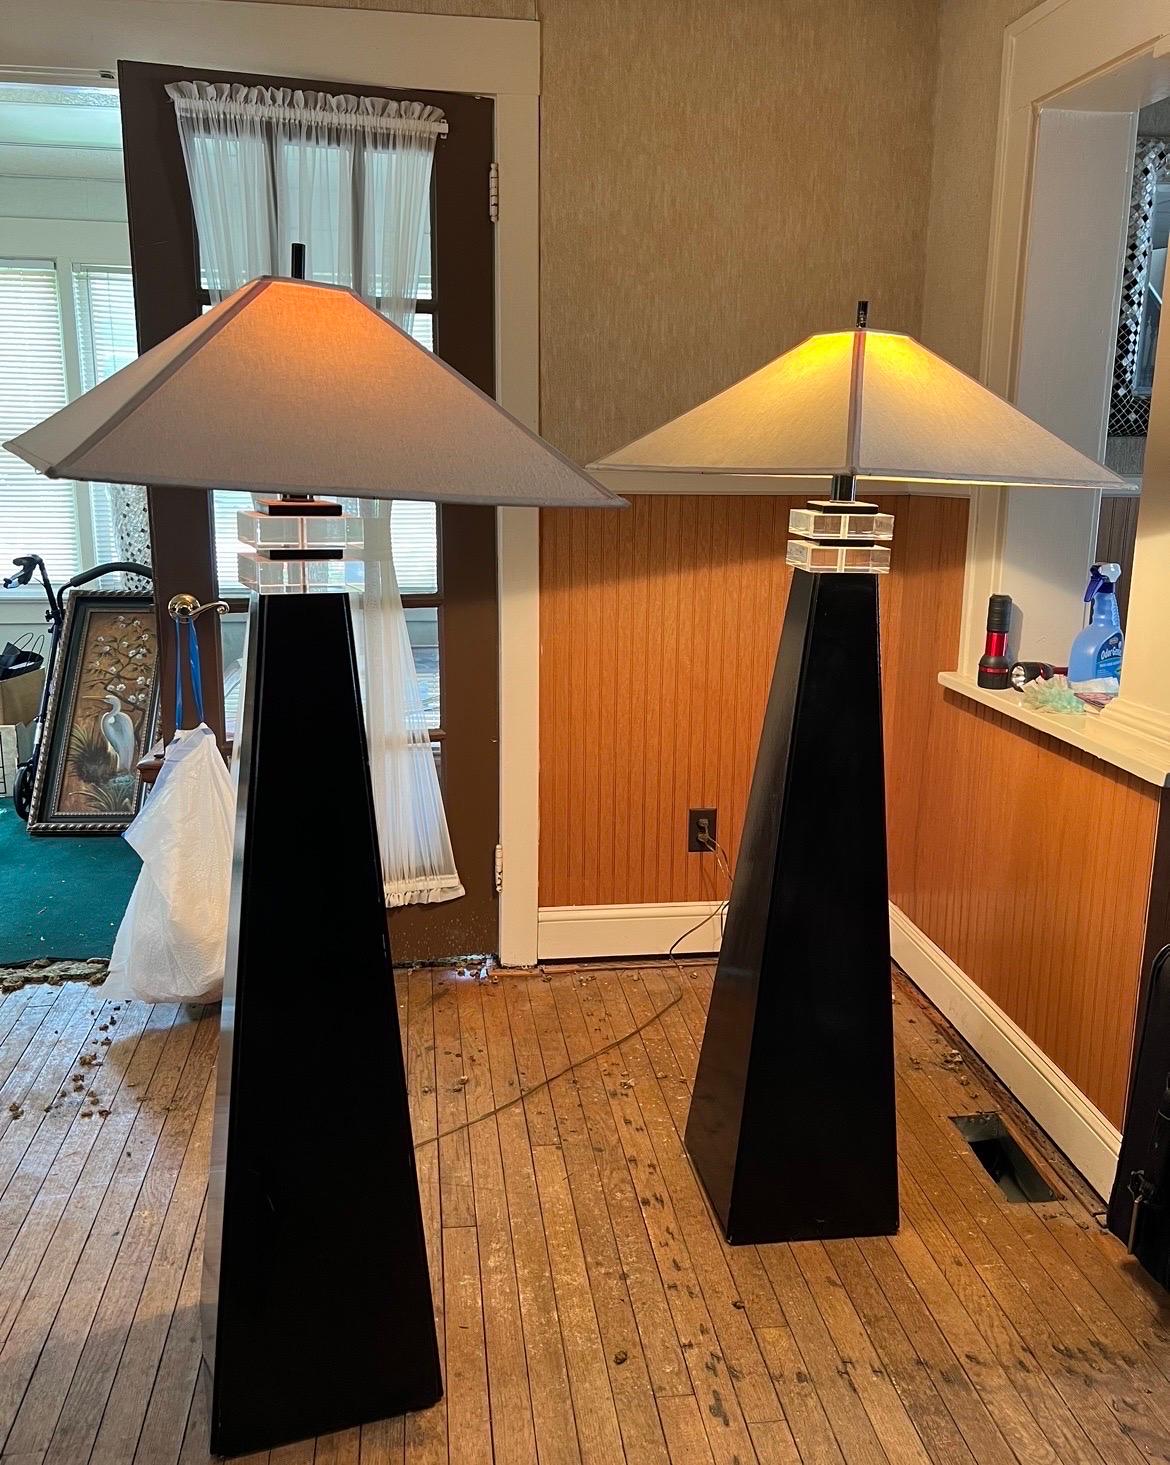 This pair is made in 1970 with the lucite details.

Perfect pieces for living room as the statement pieces.

